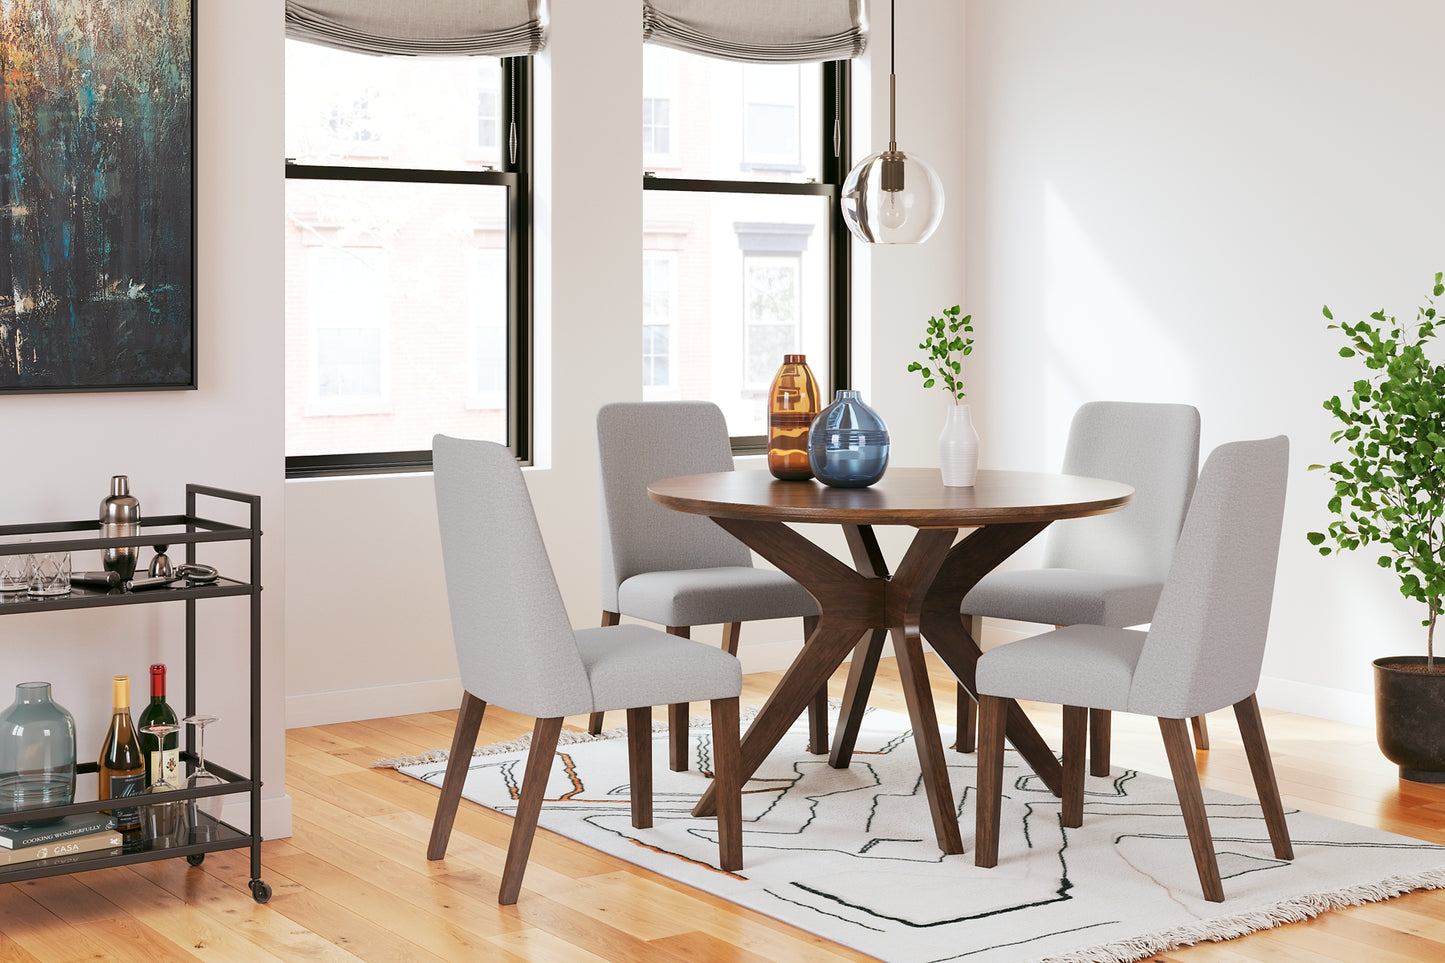 Ashley Express - Lyncott Dining Table and 4 Chairs